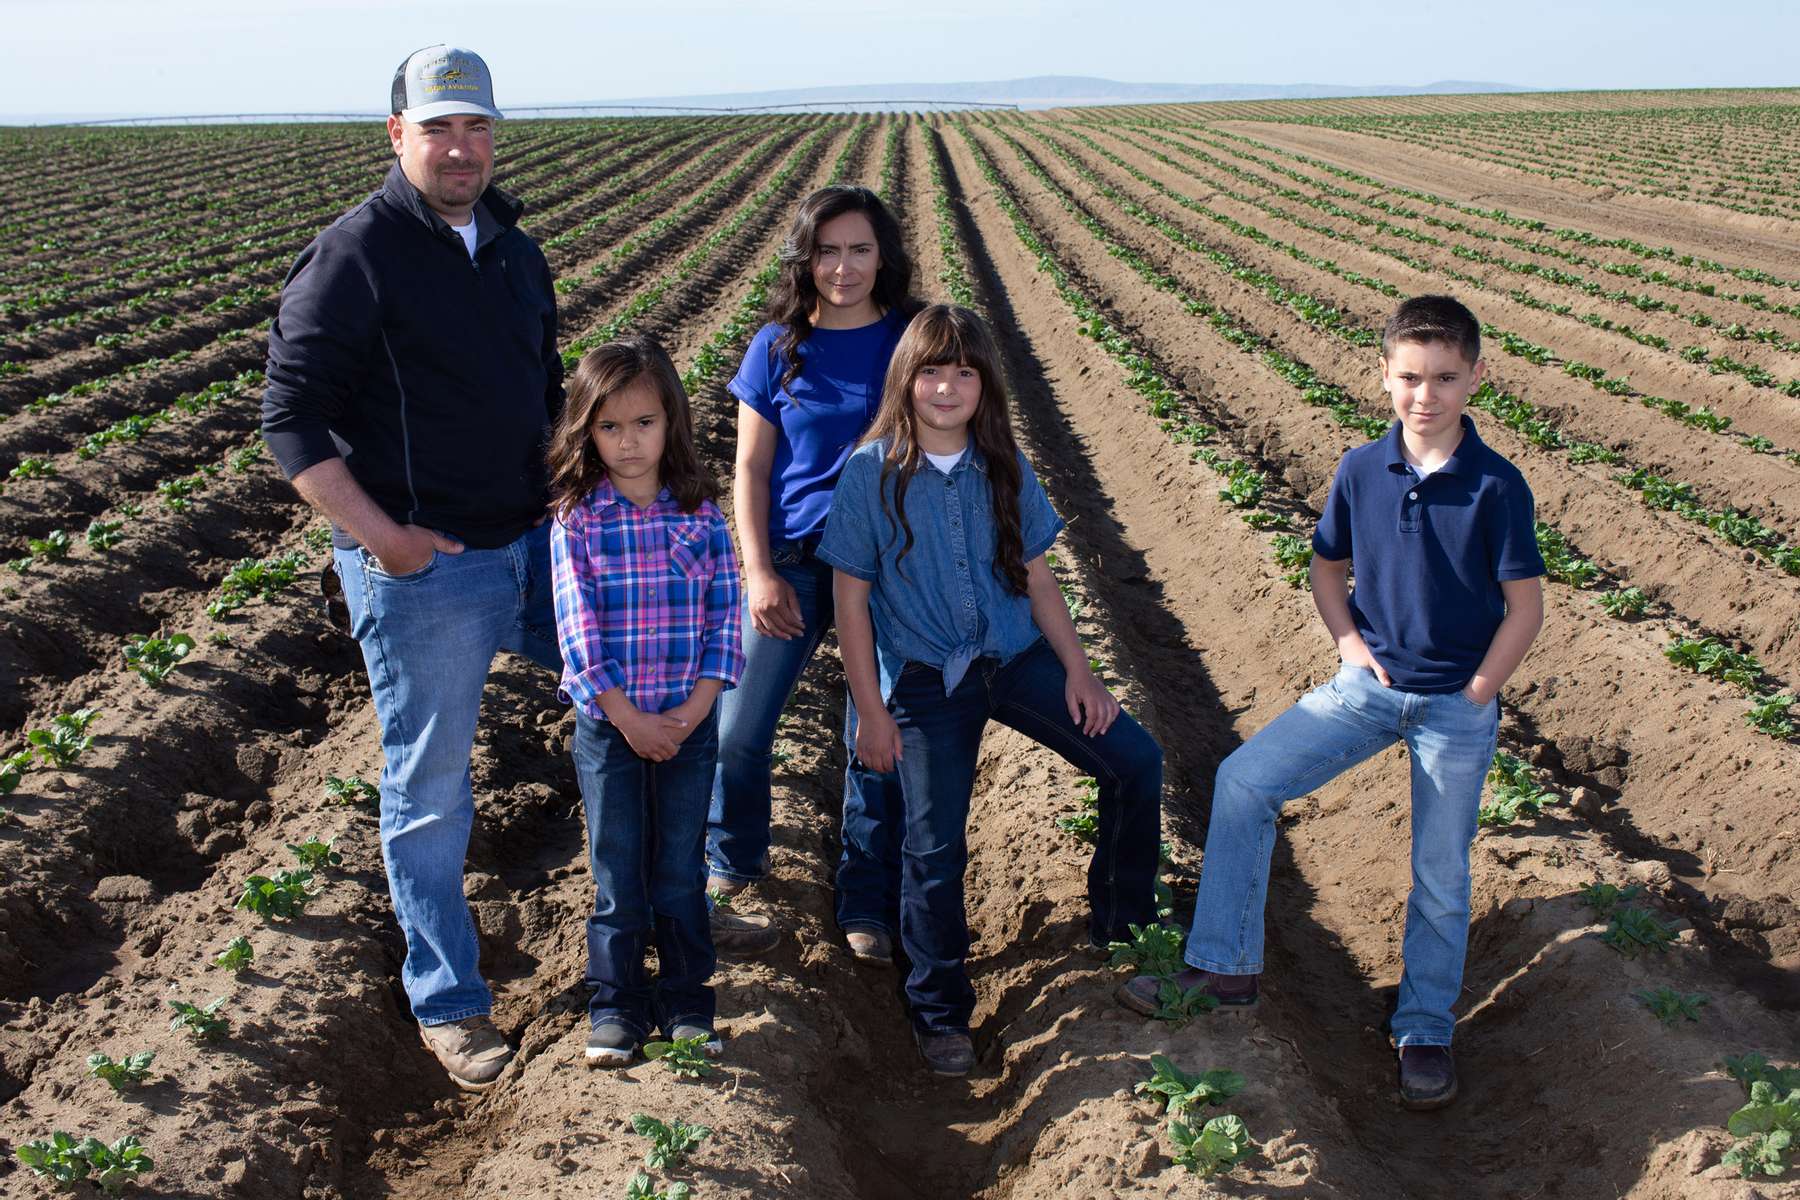 From left to right: Jordan Reed, Breanna, 5 years Mia, Addison, 8, and Owen, 10 pose in a neighbor’s potato field in Pasco, Washington on May 1, 2020. A billion pounds of excess potatoes in Washington state, second largest potato producer in the country. About 70 percent of its crop usually goes to overseas, to Pacific Rim countries primarily, in the form of french fries, but with so many restaurants/food service closed in U.S. and internationally, they have way more potatoes than they can sell. Last year they didn’t have enough to meet demand; now growers are facing the prospect of losing it all. (photo by Karen Ducey for the Los Angeles Times)